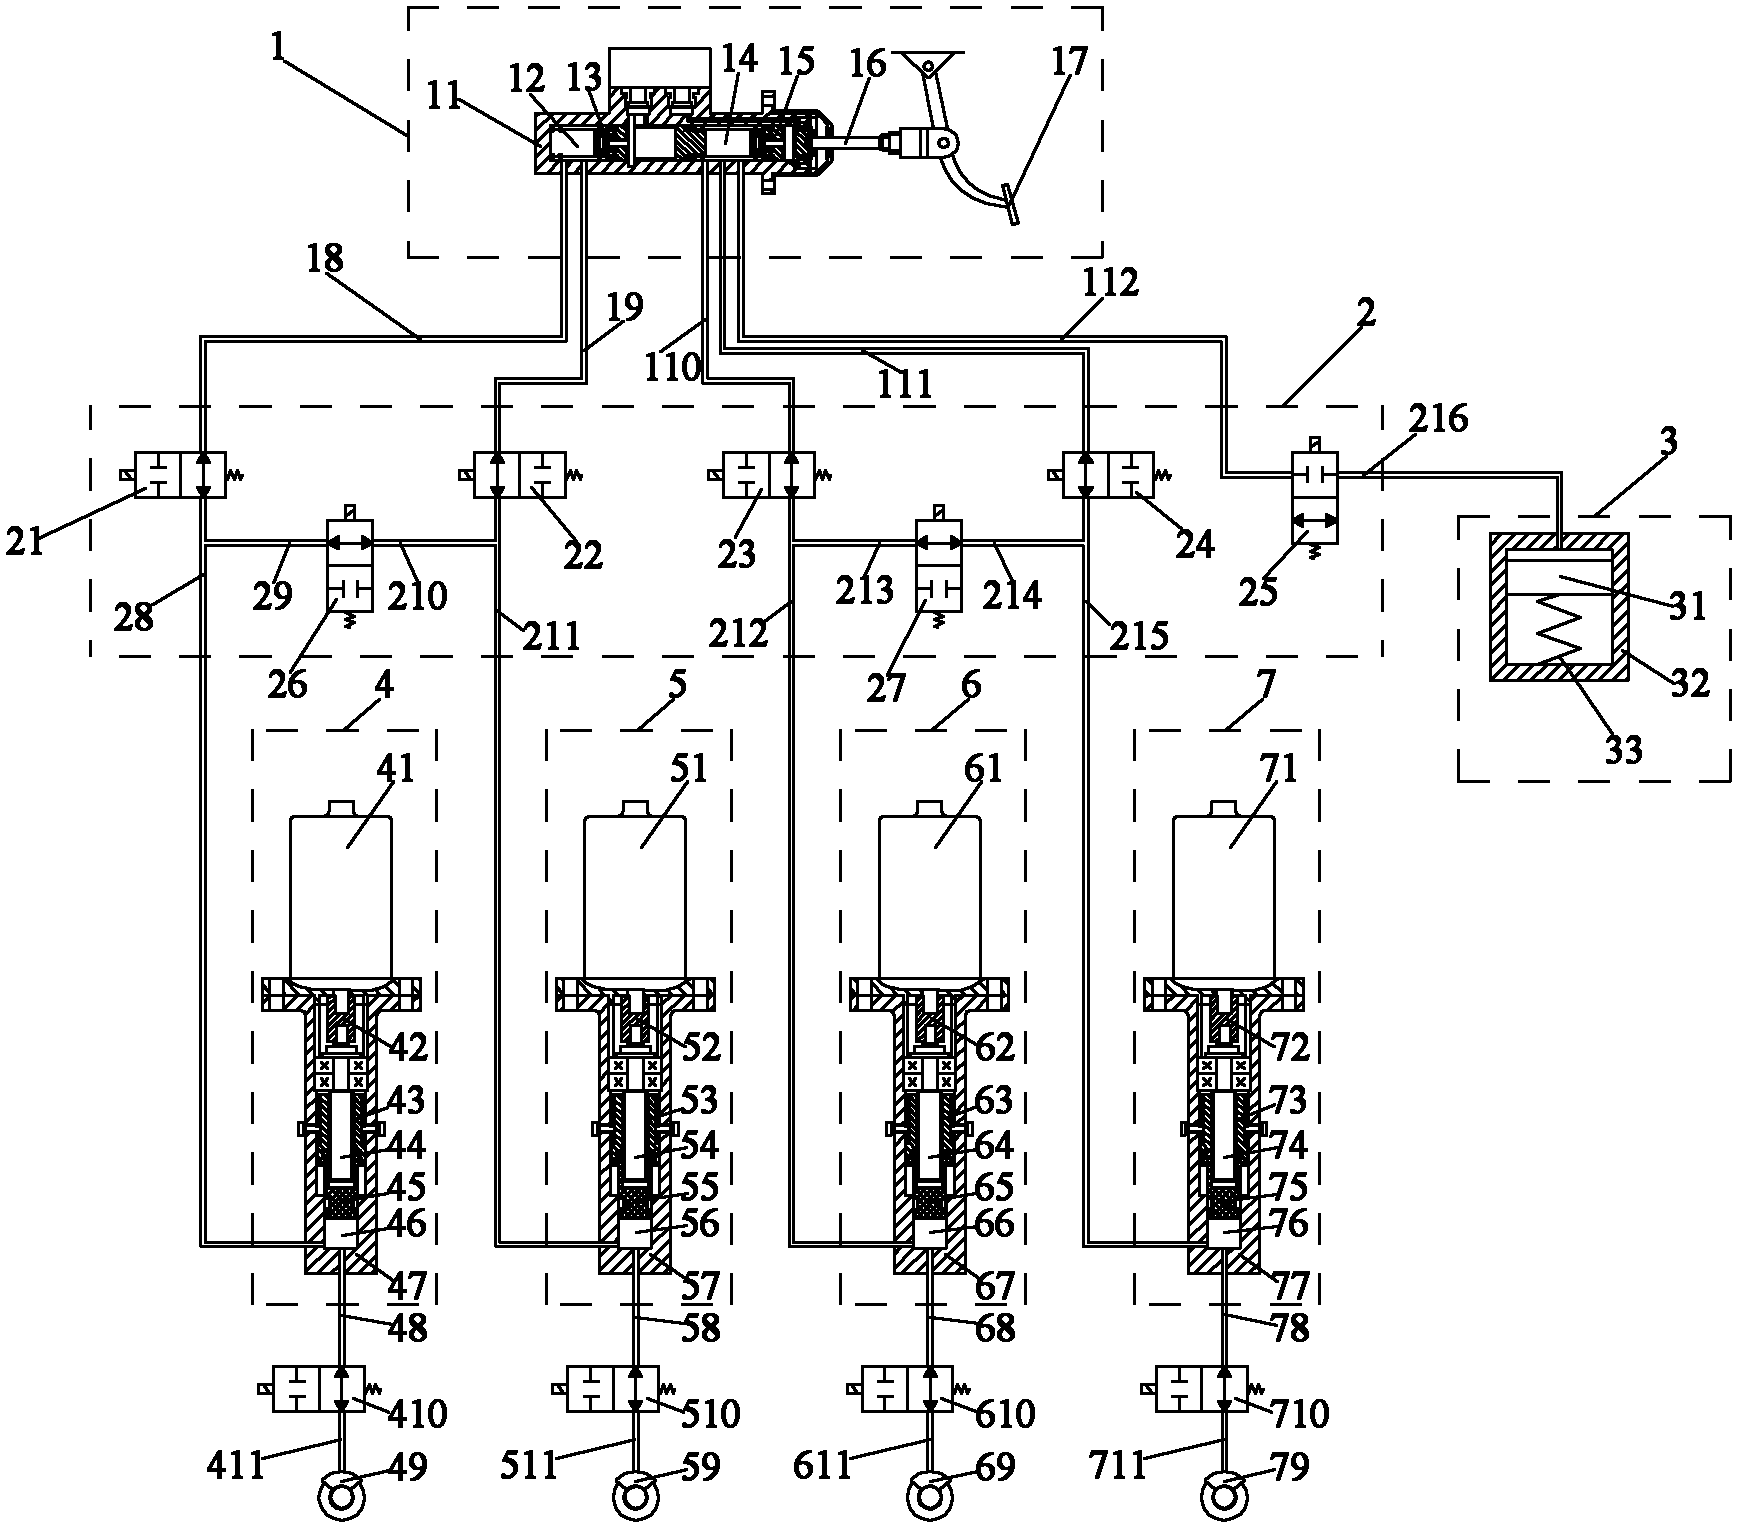 Automotive distributed electronic hydraulic braking system with pressure retaining valves